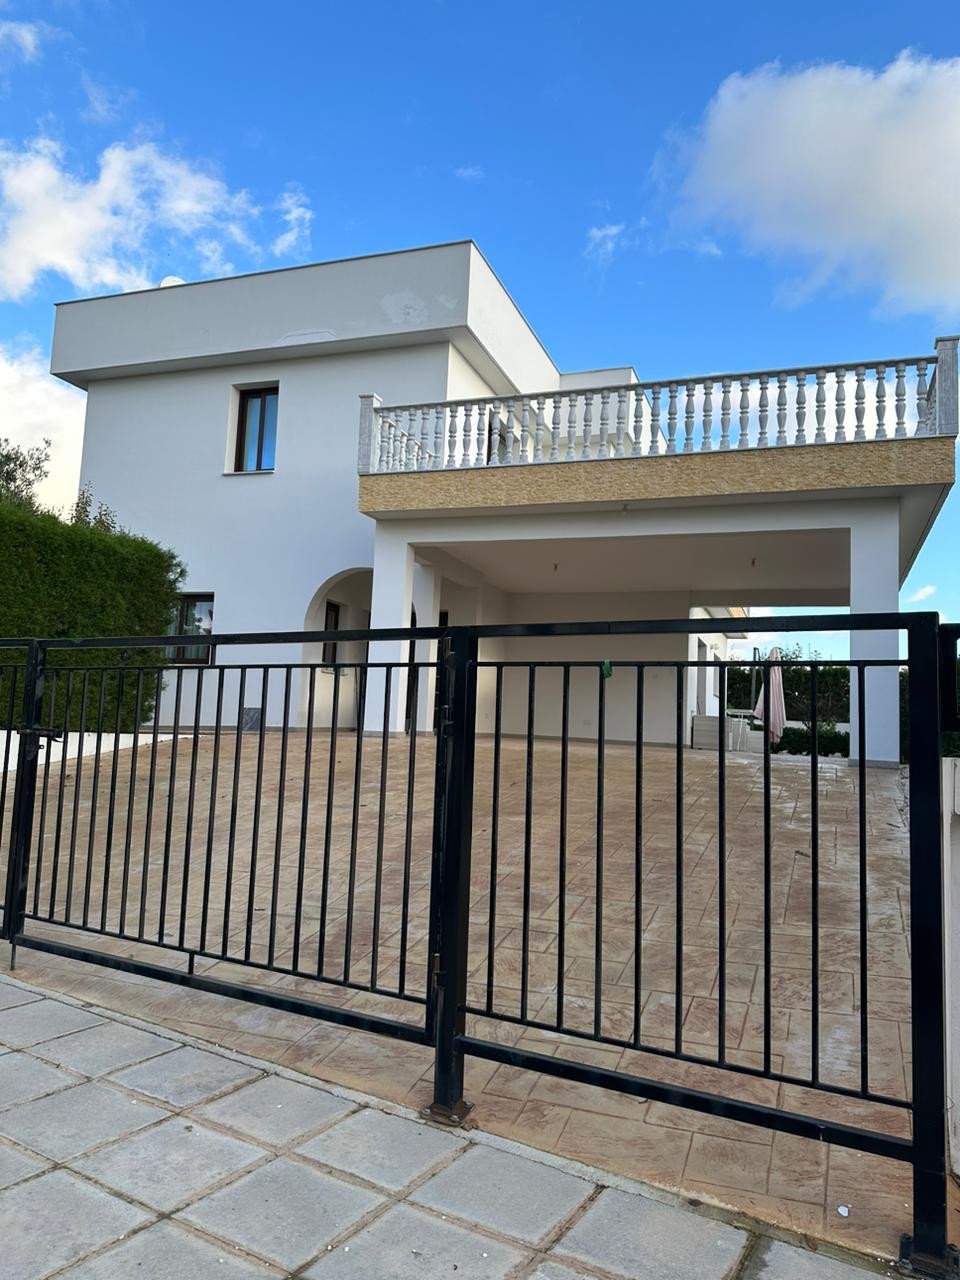 Property for Sale: House (Detached) in Saint Georges, Paphos  | Key Realtor Cyprus